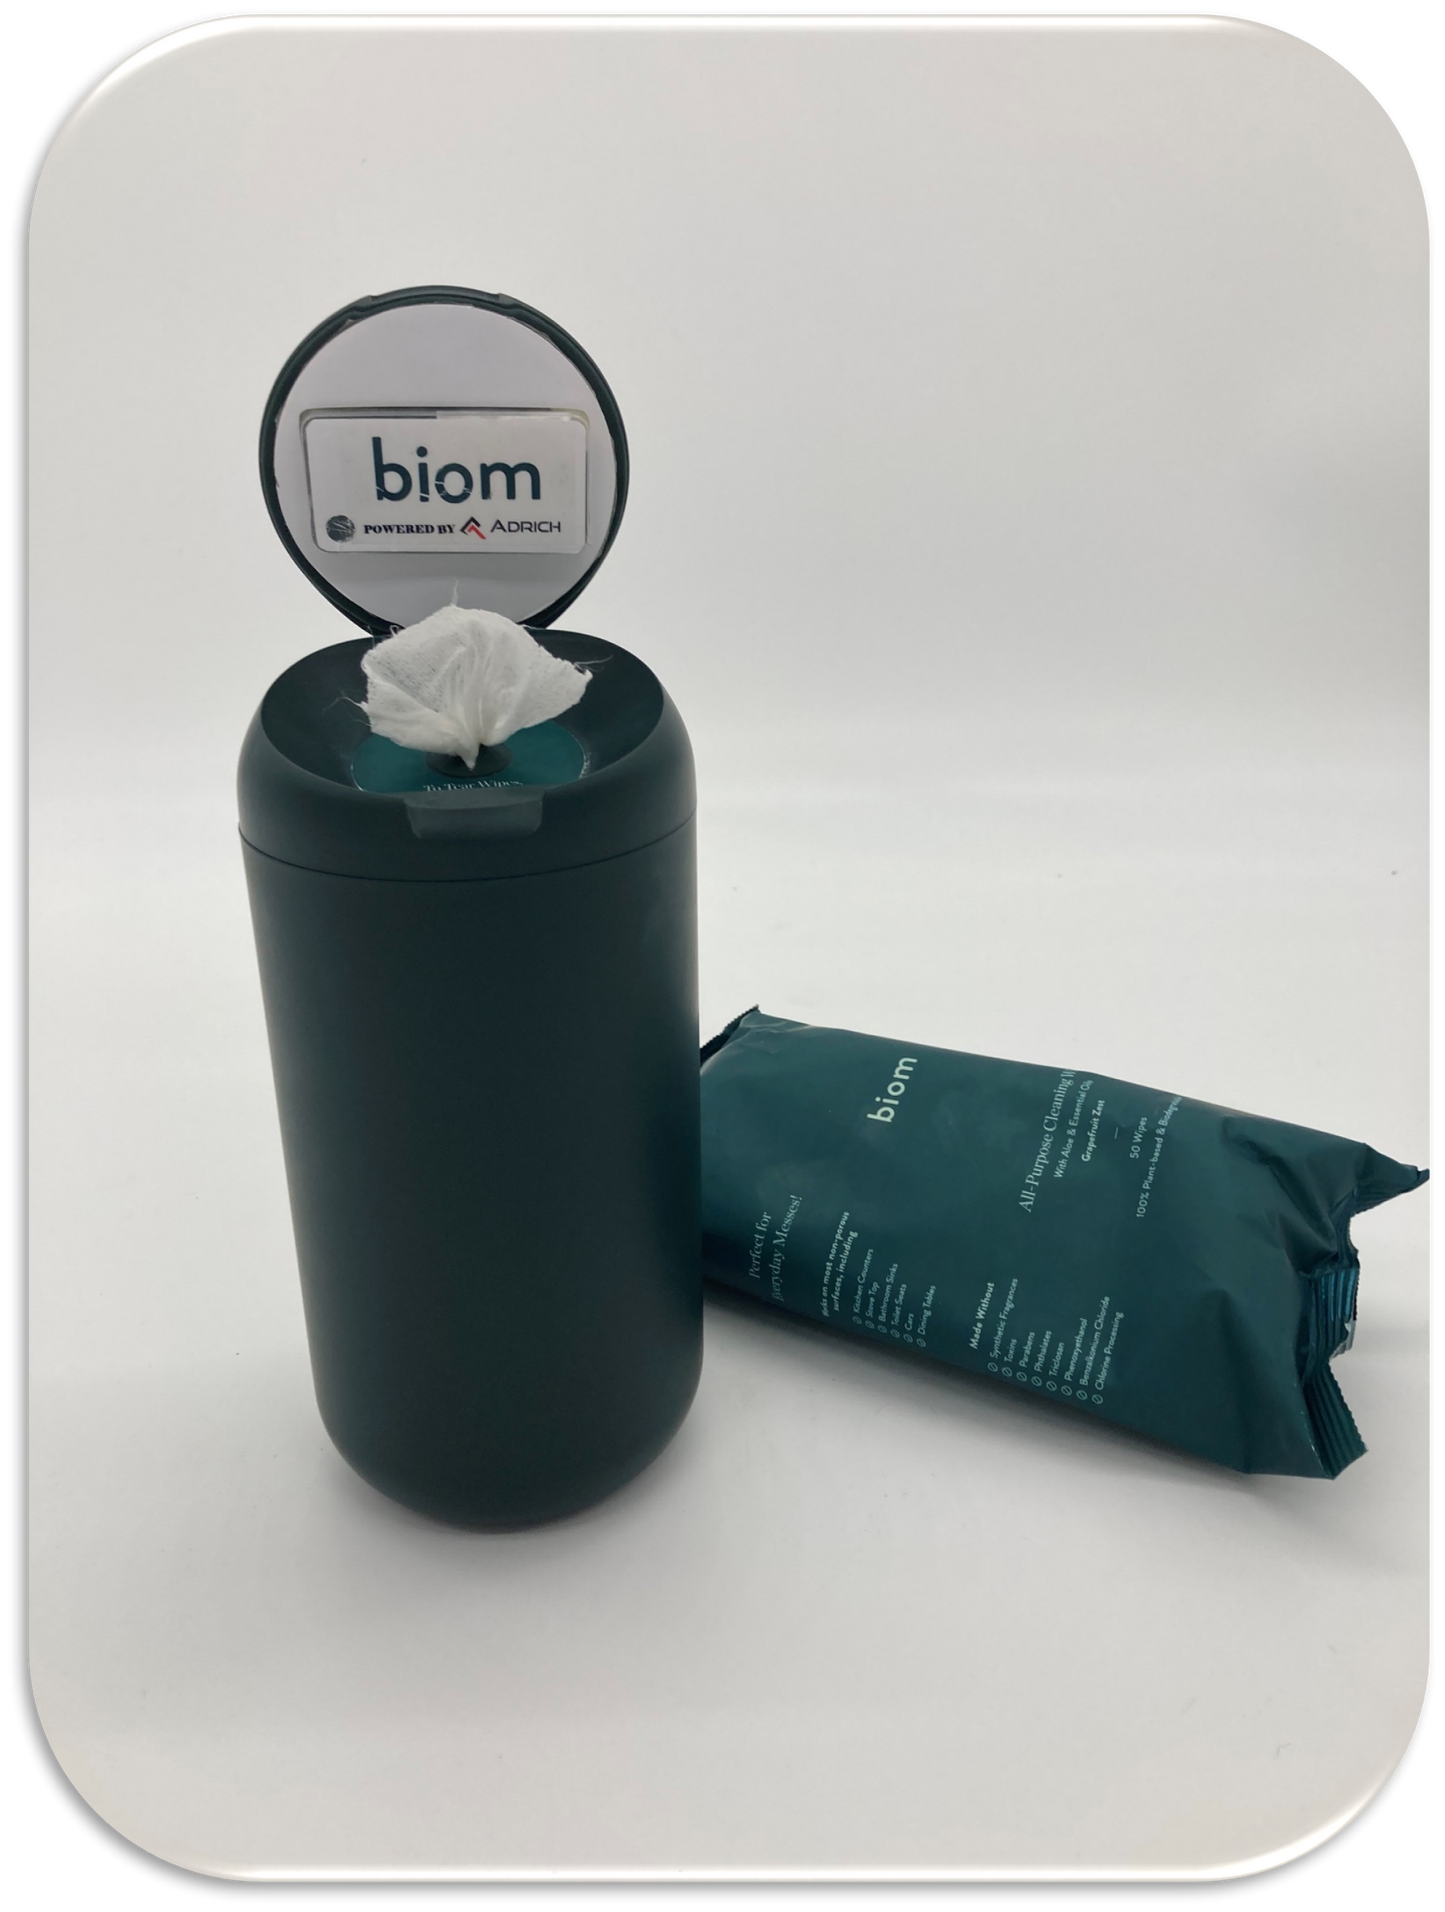 Biom Refillable All-Purpose Cleaning Wipes - Smart Starter Kit